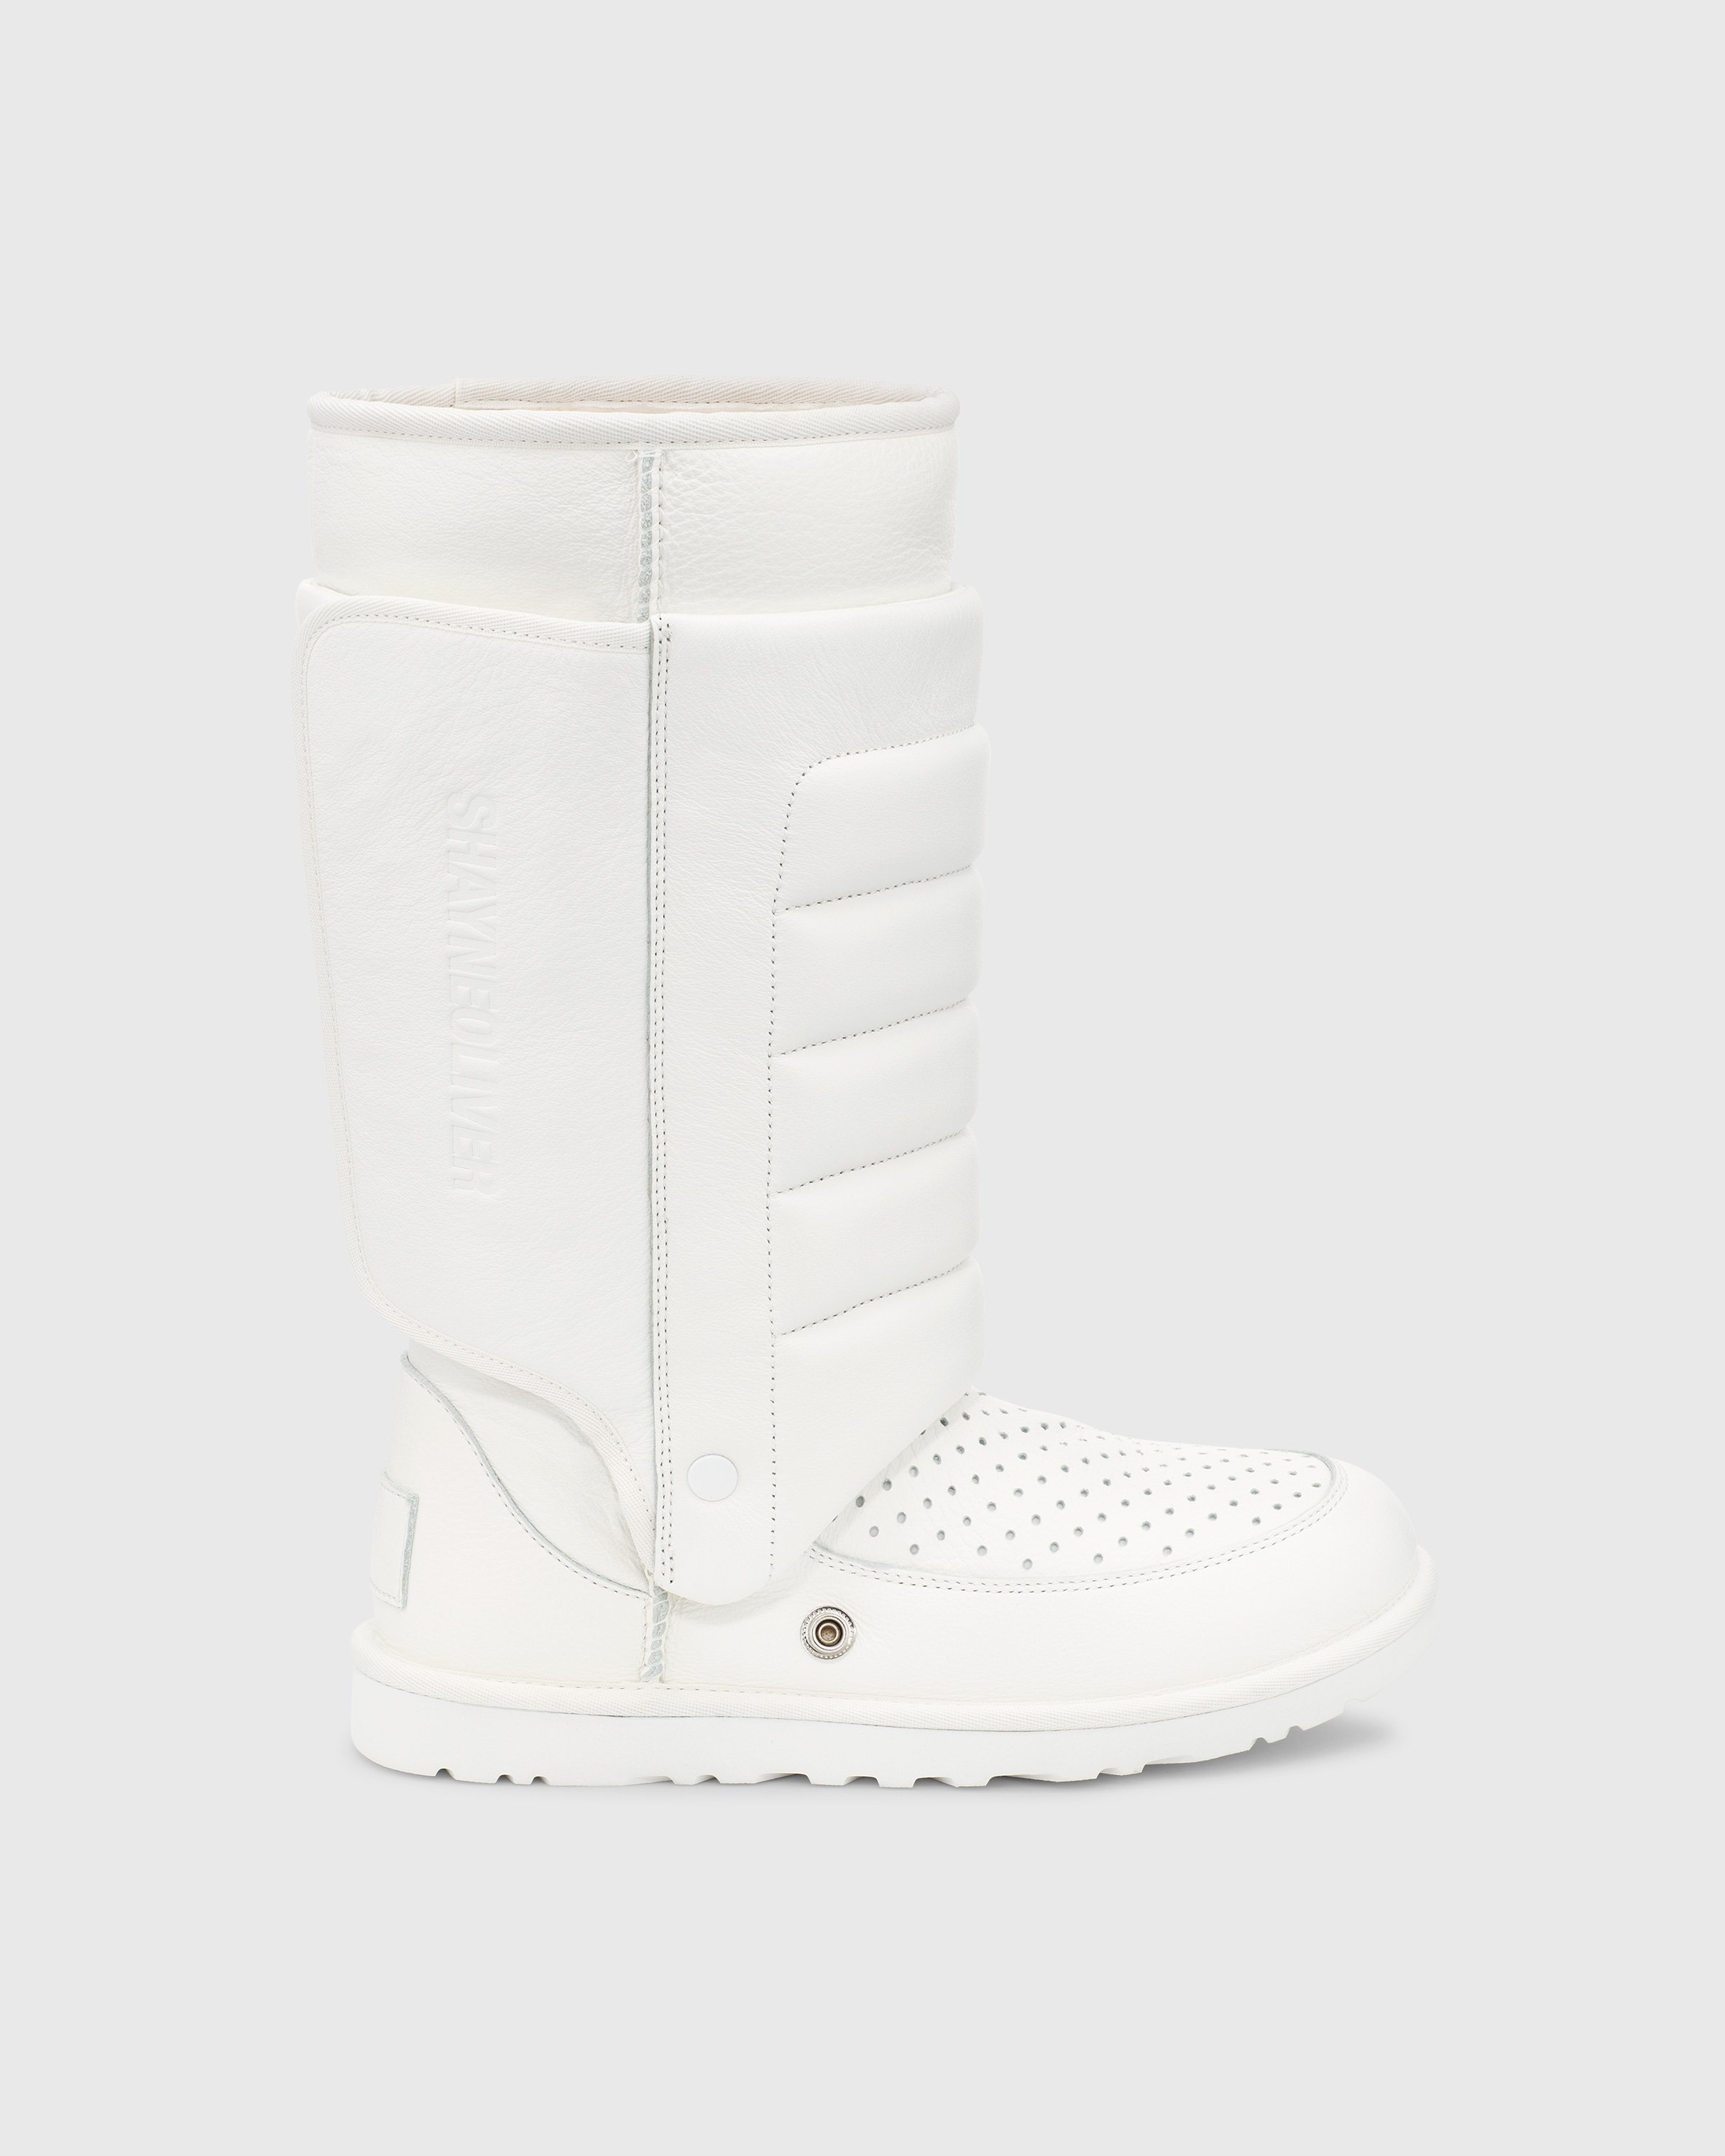 Ugg x Shayne Oliver - Tall Boot White - Footwear - White - Image 5